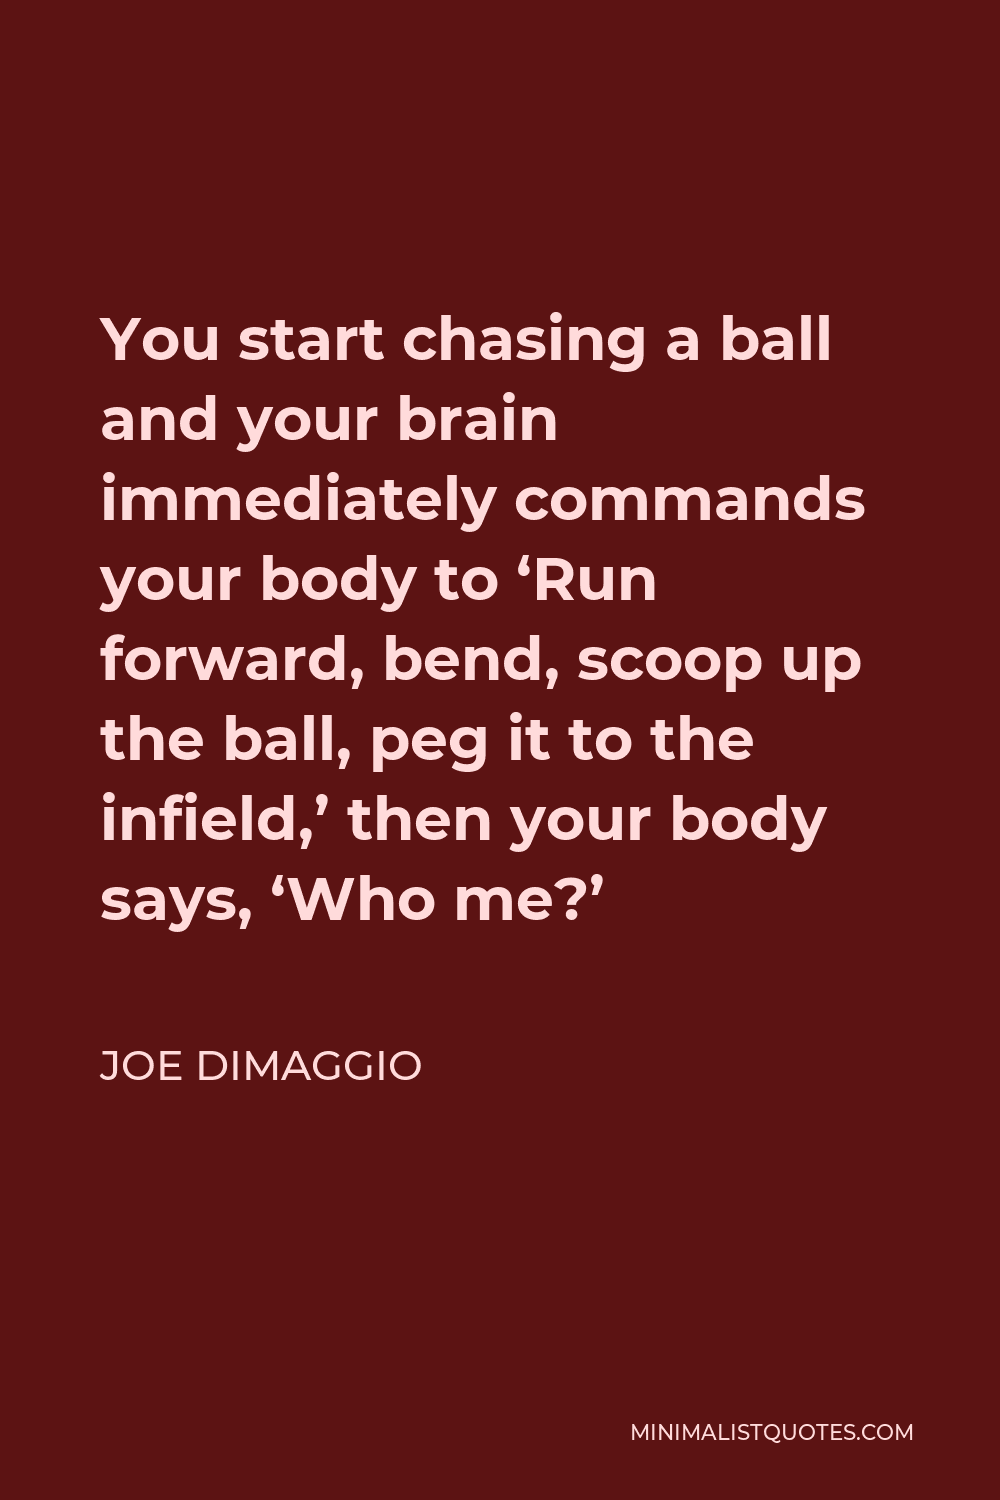 Joe DiMaggio Quote - You start chasing a ball and your brain immediately commands your body to ‘Run forward, bend, scoop up the ball, peg it to the infield,’ then your body says, ‘Who me?’